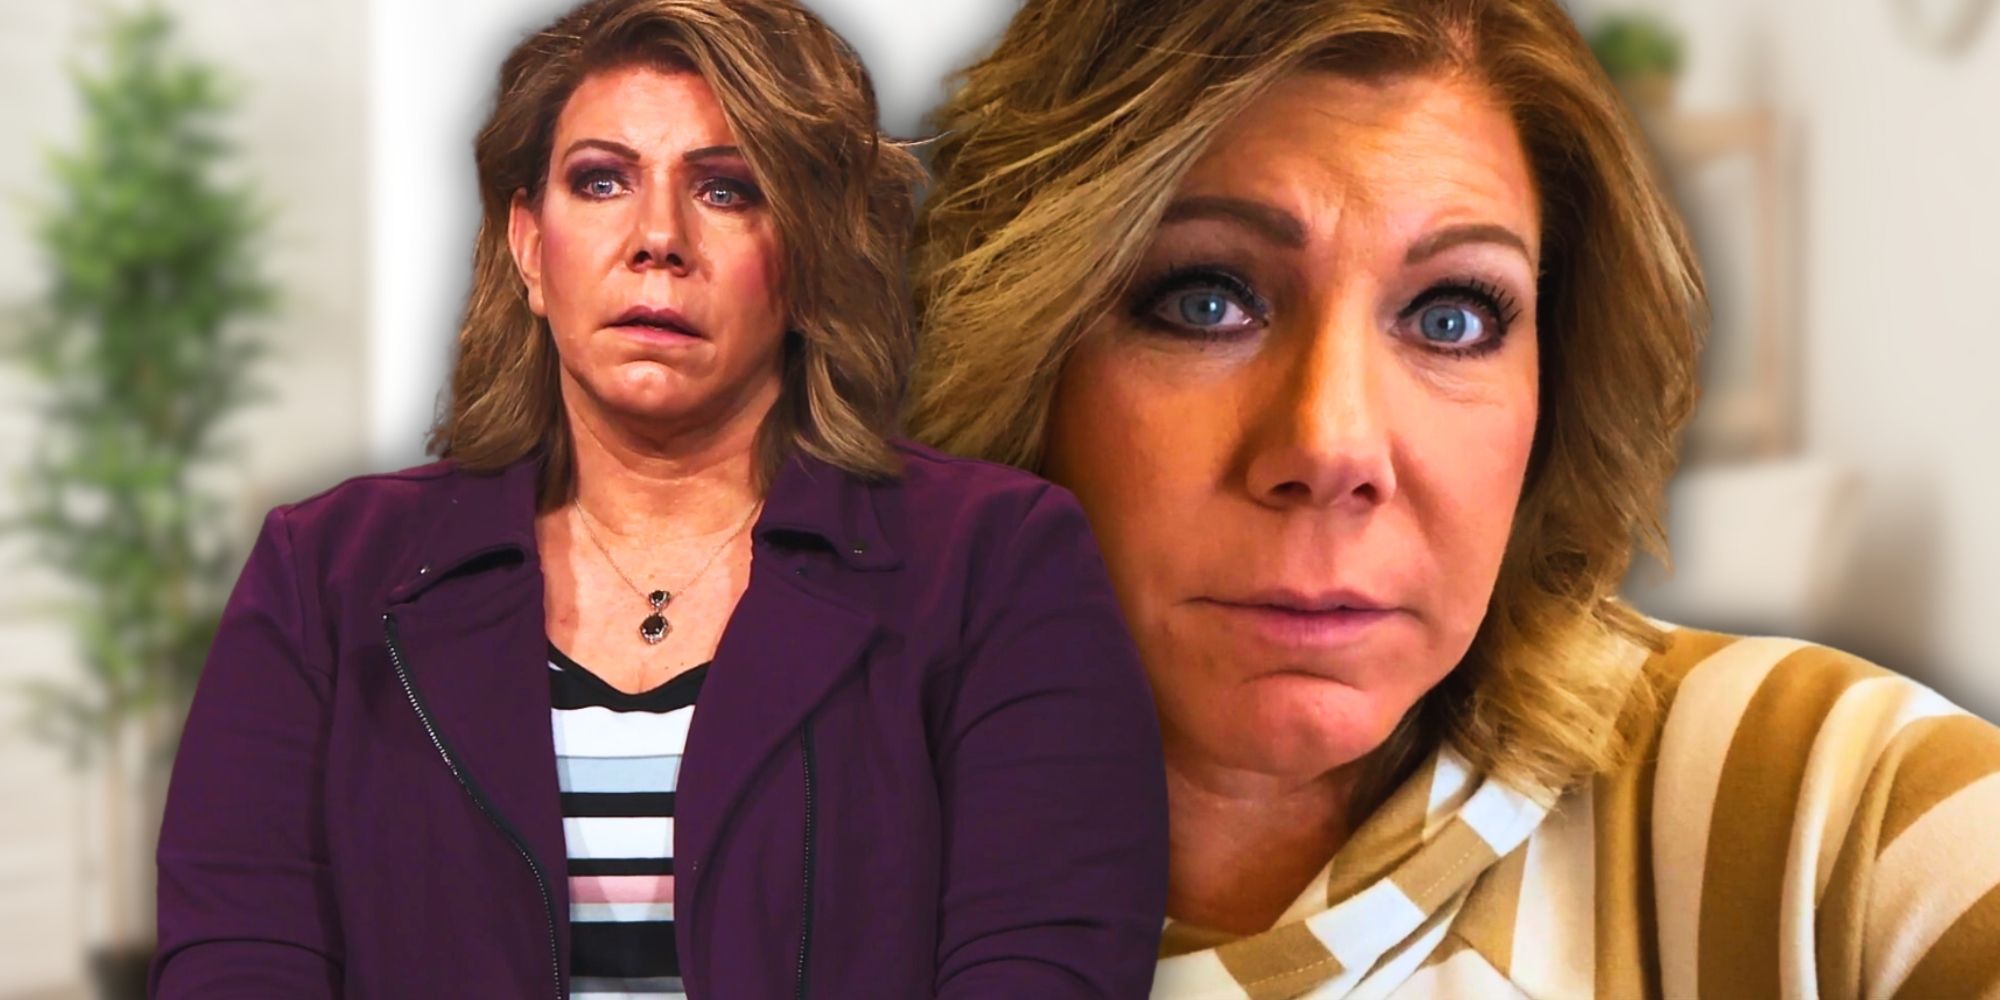 Meri Brown montage from sister wives one close up serious expression